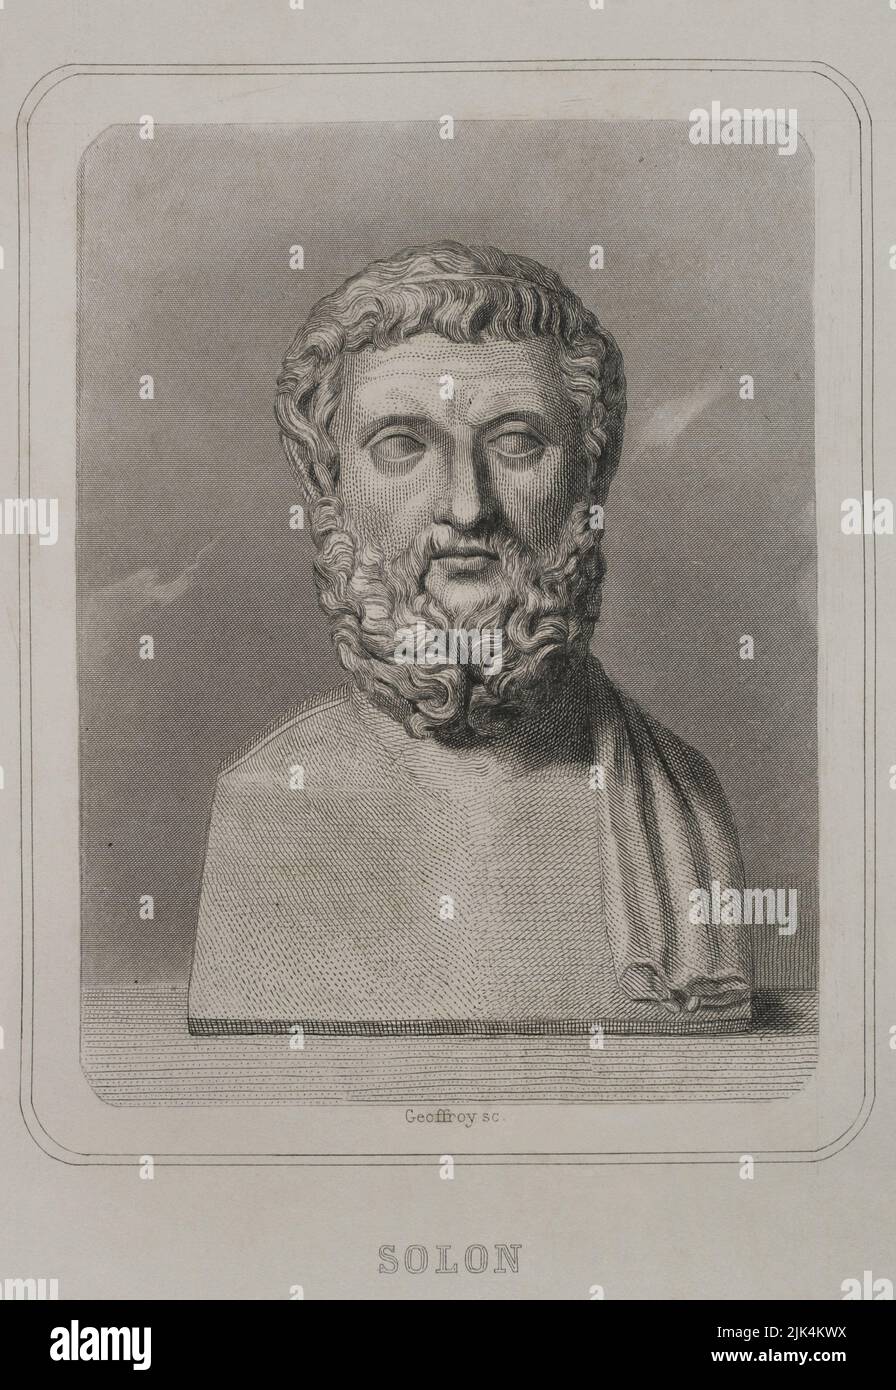 Solon (ca. 640 BC - ca. 558 BC). Athenian lawmaker, statesman and poet, one of the Seven Wise Men of Greece. Portrait. Engraving by Geoffroy. 'Historia Universal', by César Cantú. Volume I. 1854. Stock Photo